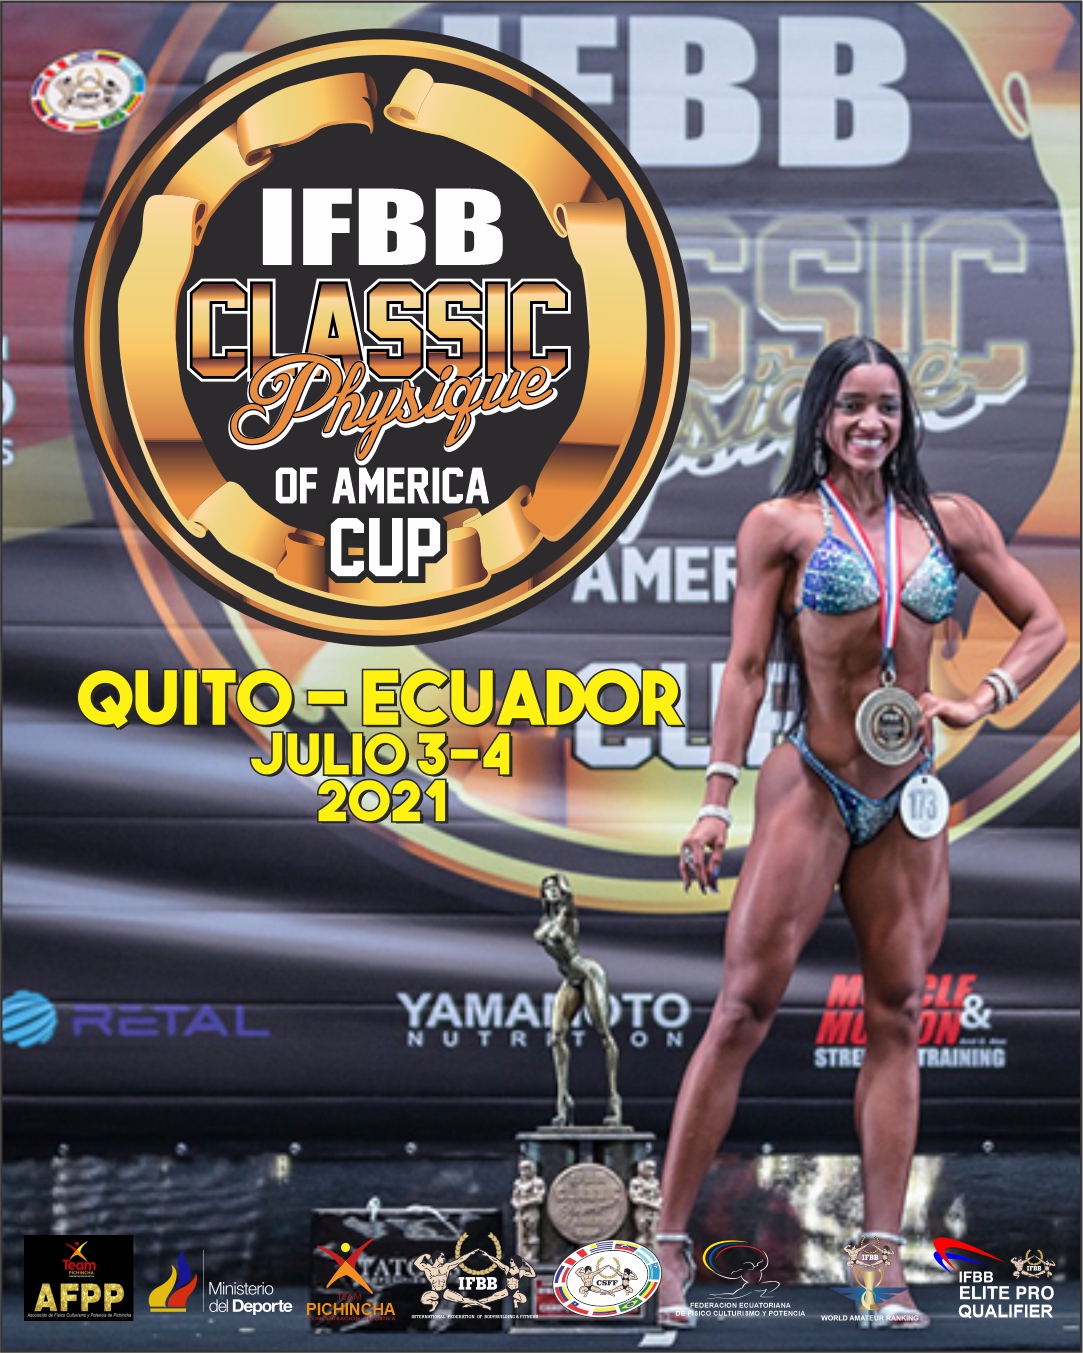 IFBB CLASSIC PHYSIQUE OF AMERICA CUP 21